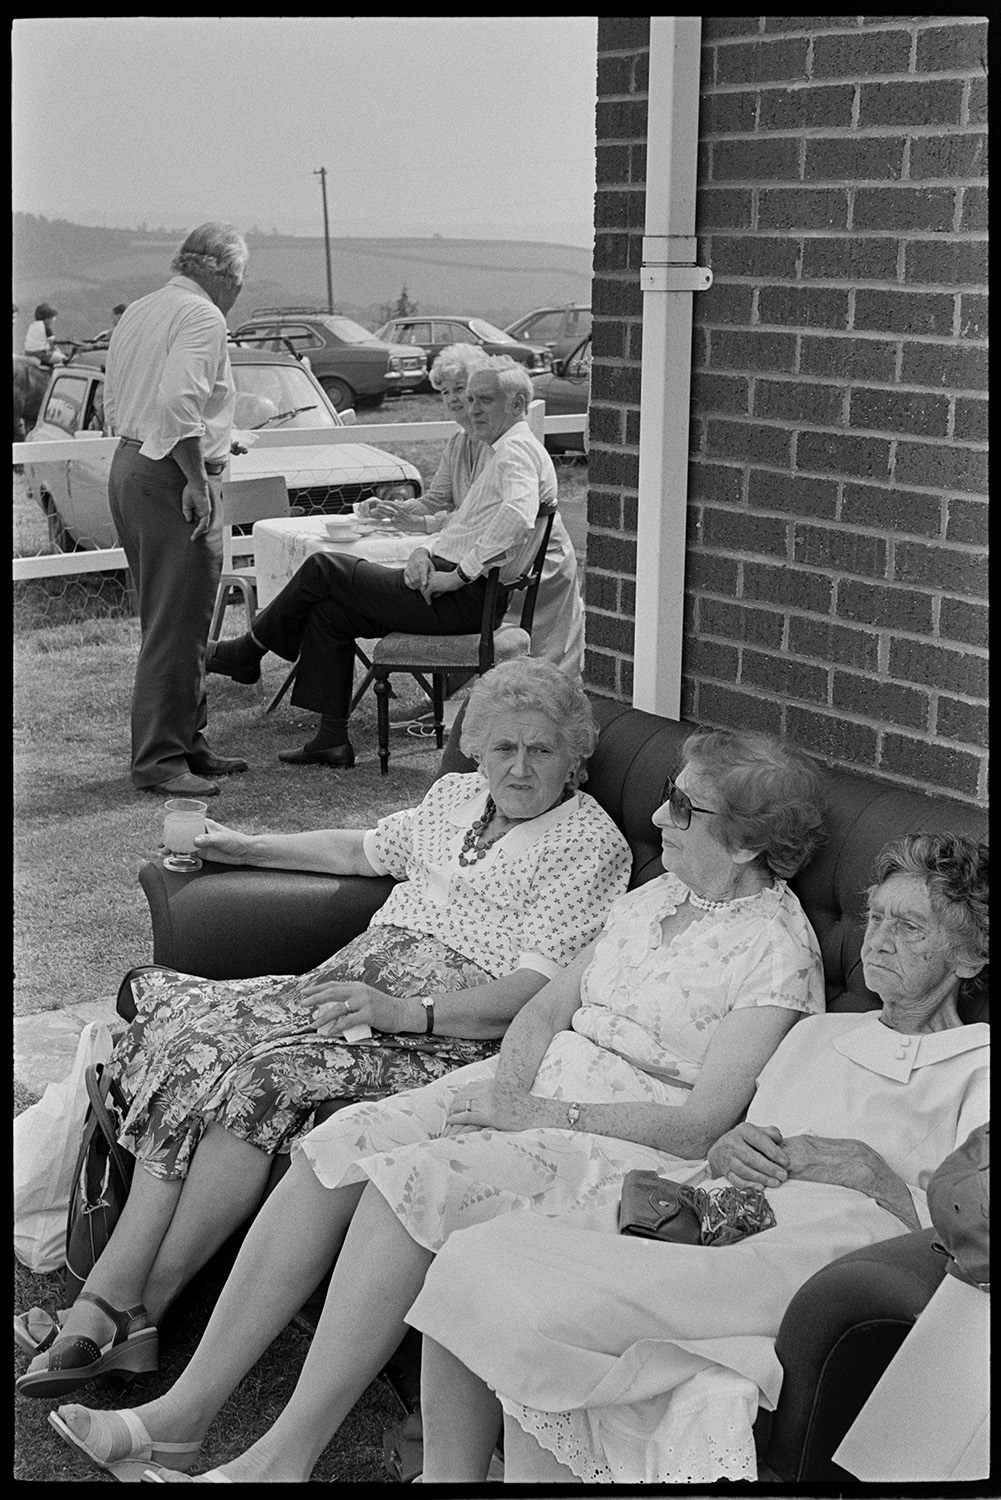 Church fete in garden, stalls, cakes, vicar making speech, thatched pavilion.
[Three elderly women sitting on an outside sofa at a church fete at Cricket Close, Chulmleigh. There are other visitors having tea at a small table, behind them, with parked cars and fields in the background.]